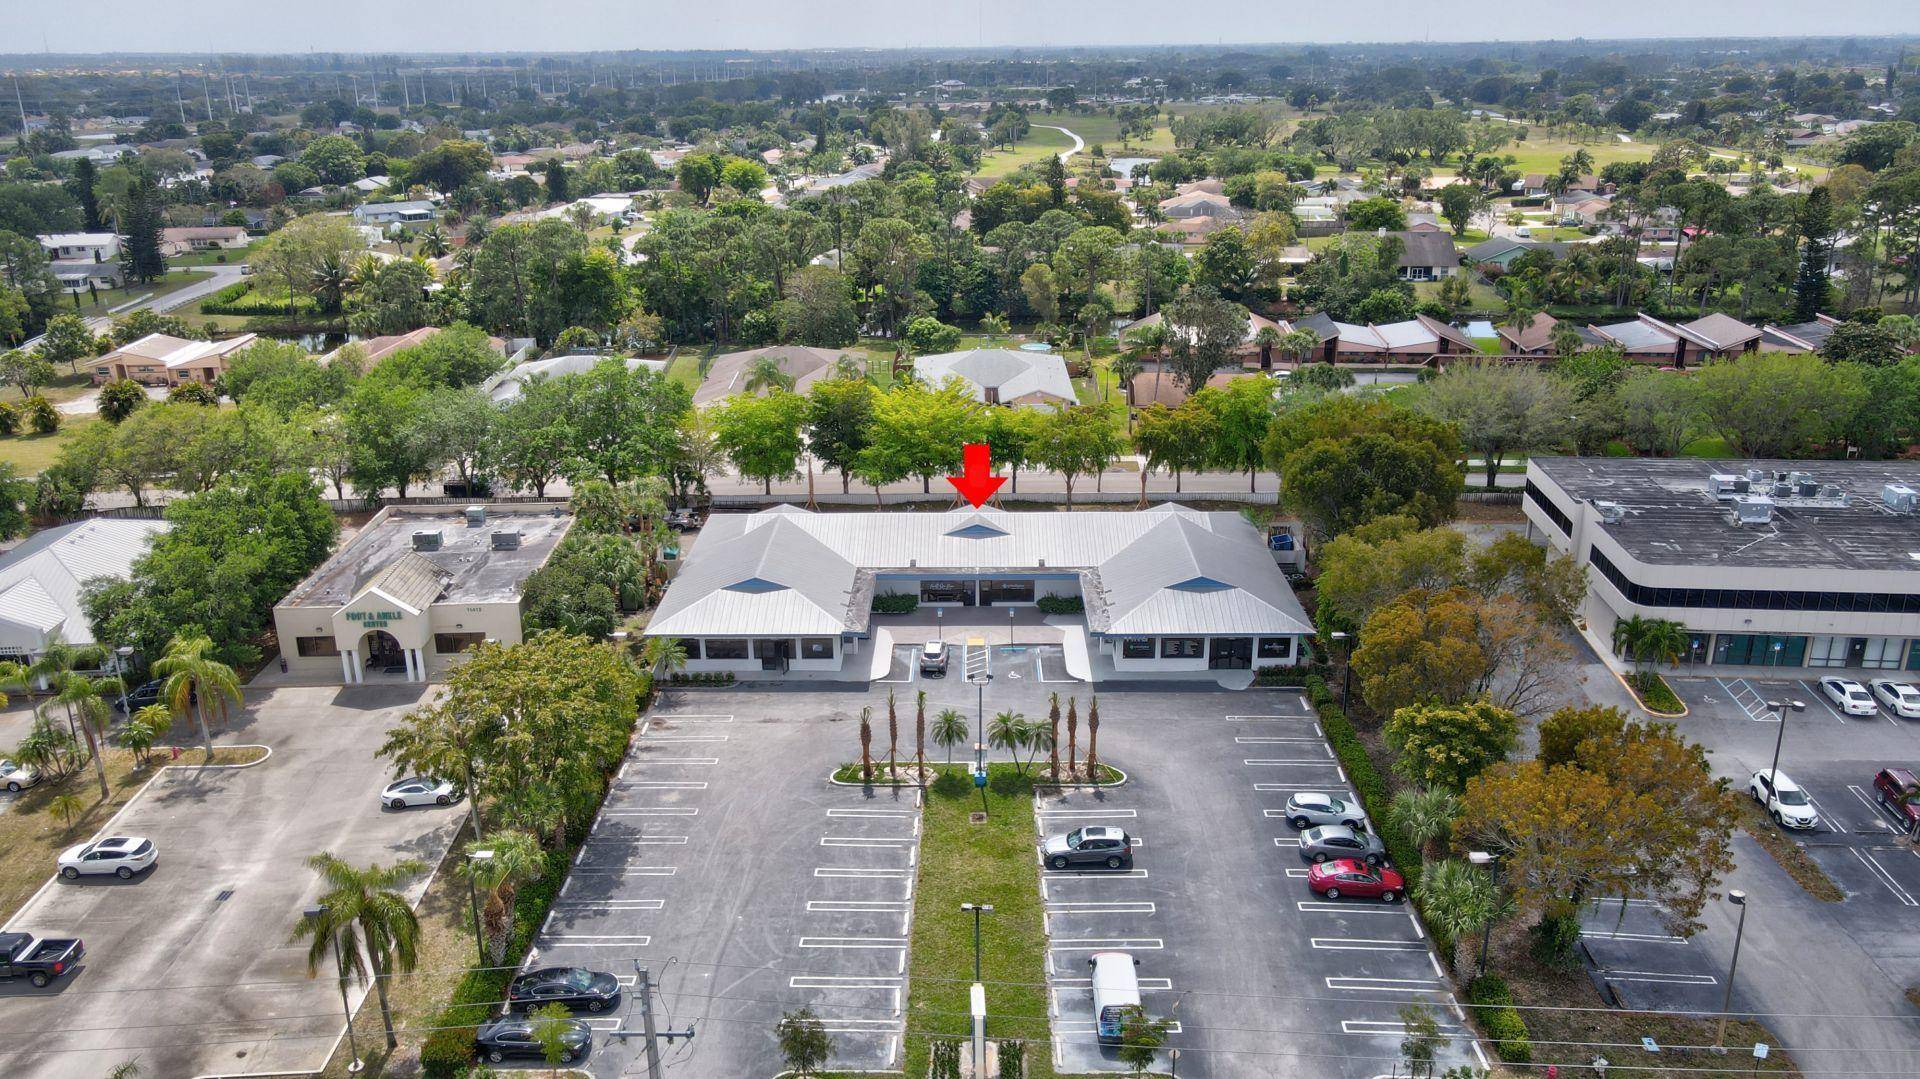 IMPRESSIVE EXPOSURE OF 44, 000 TRIPS DAY 2019 FDOT AADT ON OKEECHOBEE BLVD, WILLOWS PLAZA IS A GREAT OPPORTUNITY TO OWN 8, 747 SF RETAIL PROFESSIONAL CENTER.